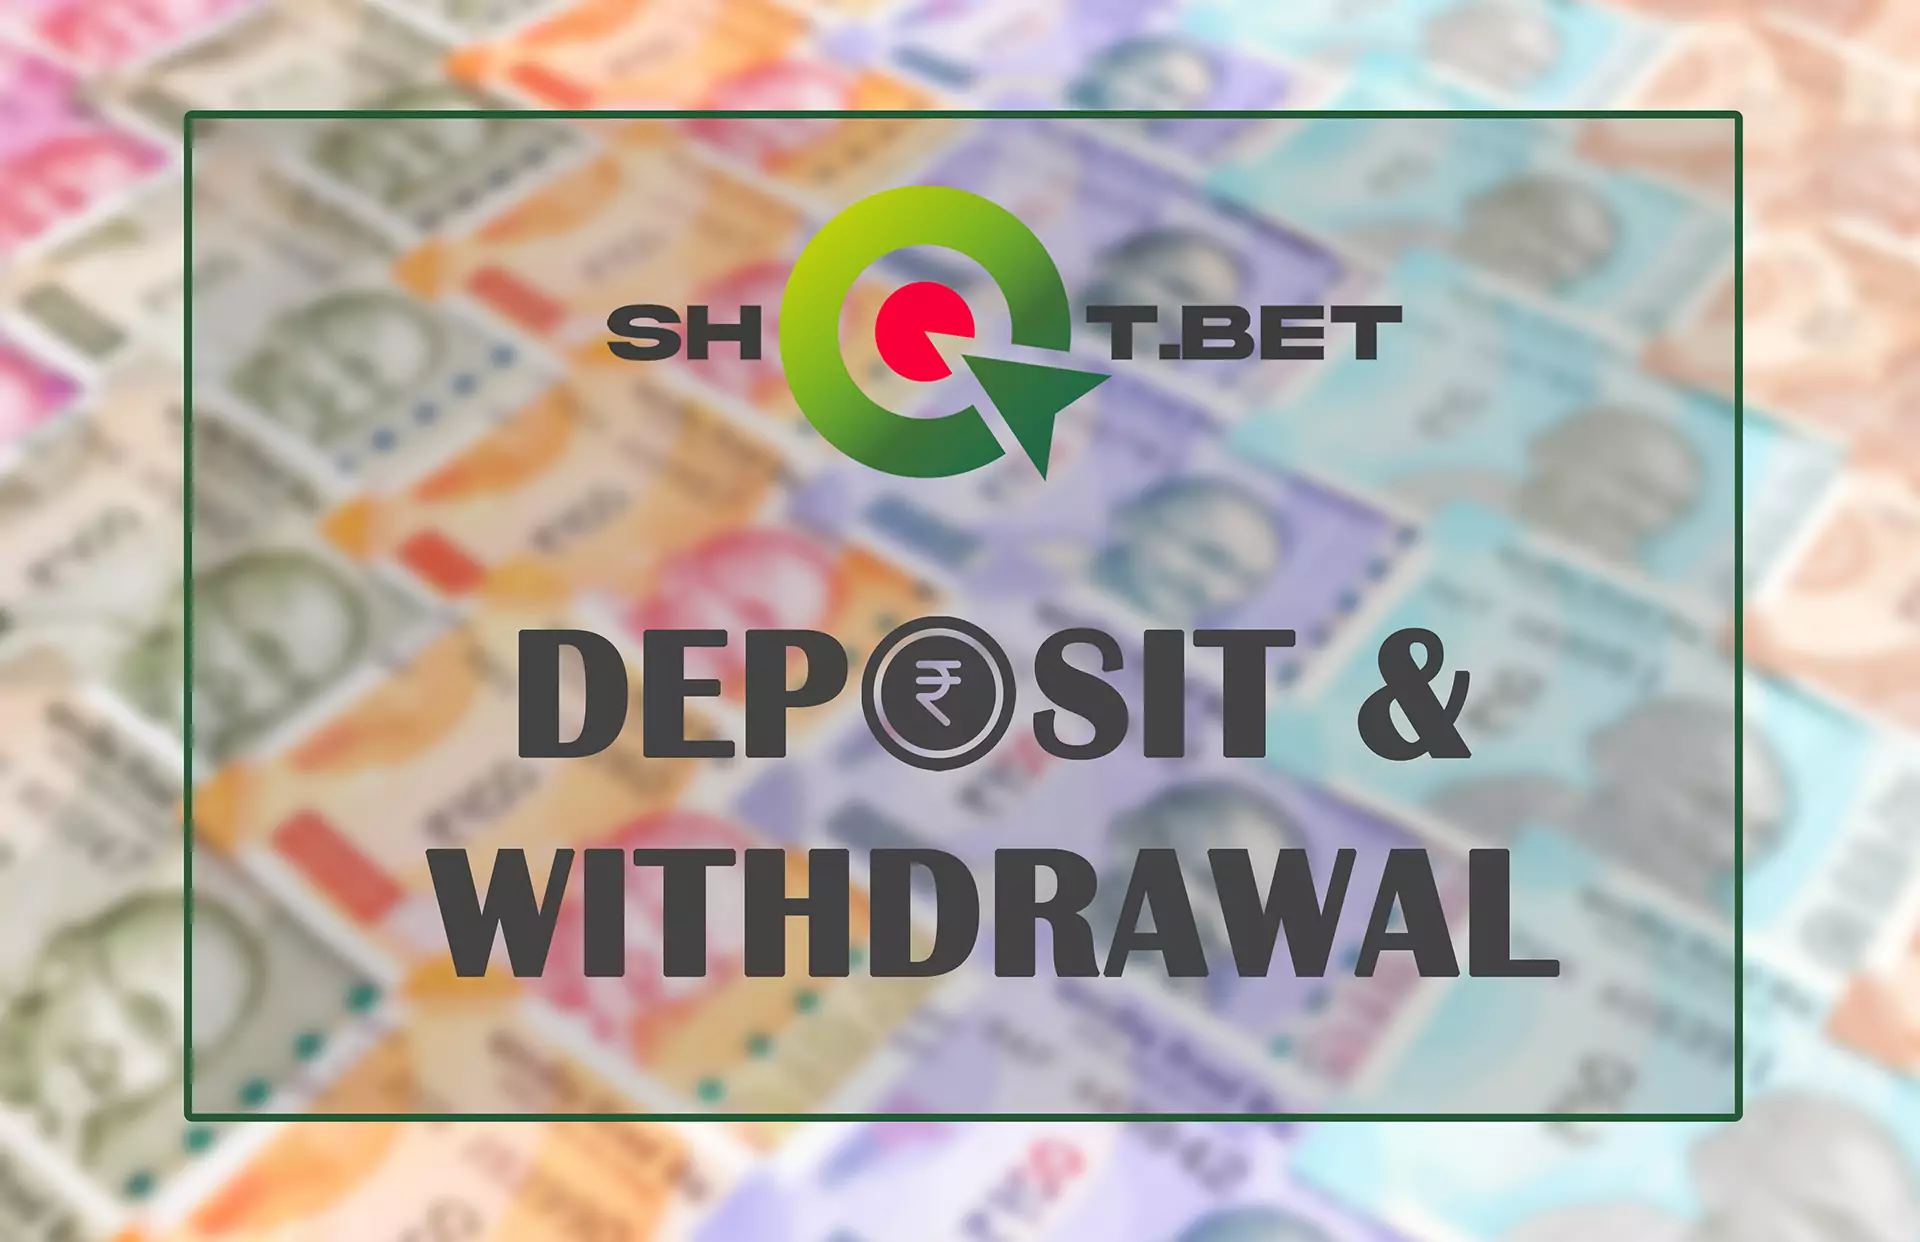 Use your payment system to deposit and withdraw.